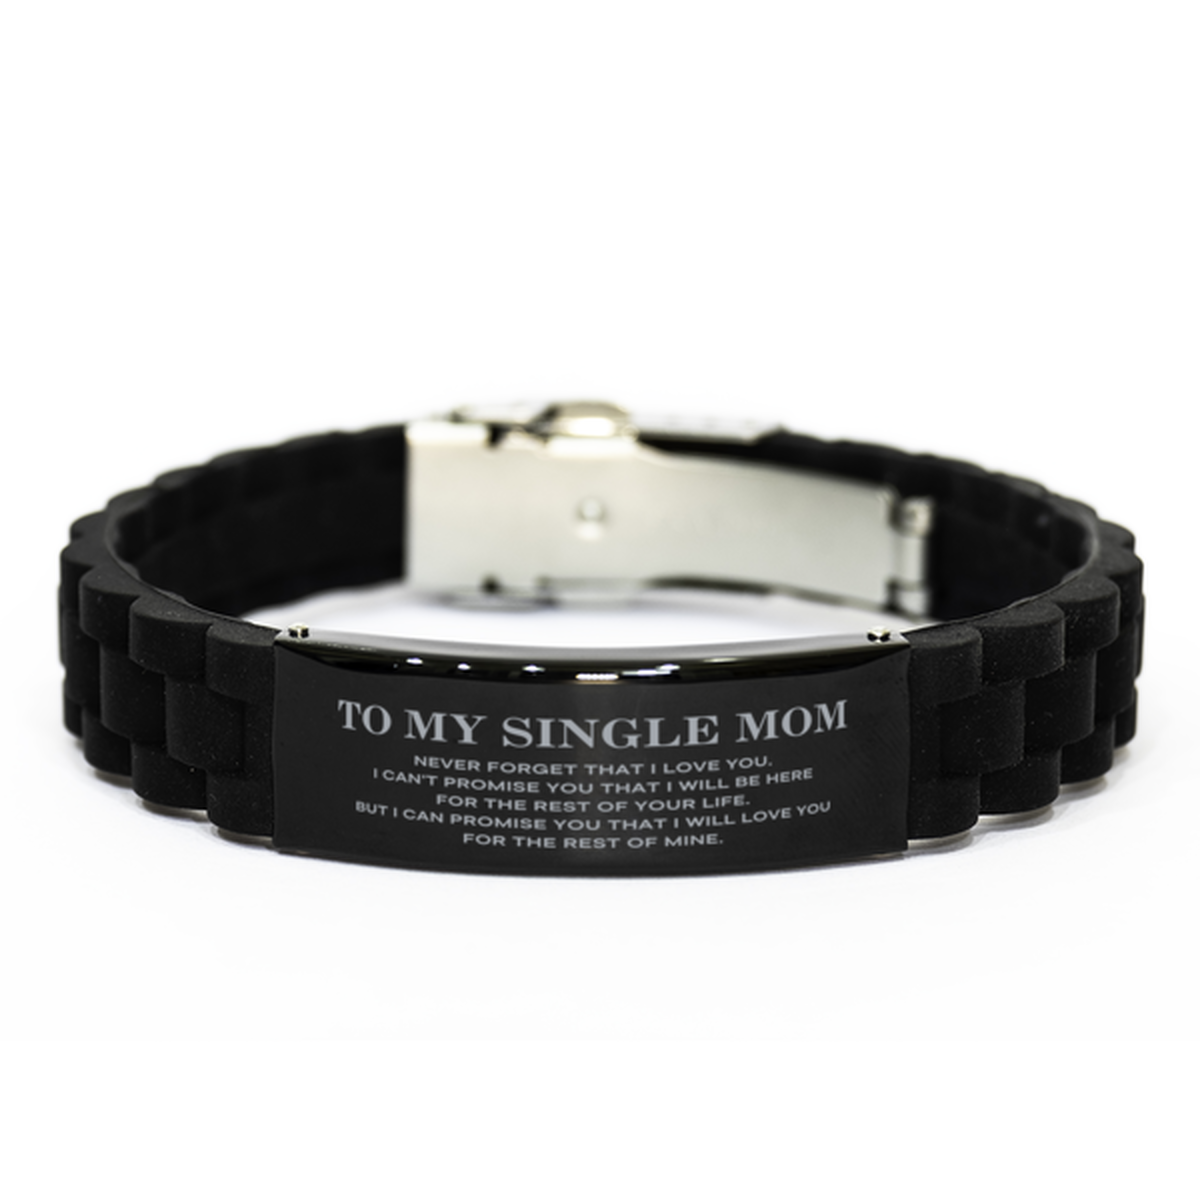 To My Single Mom Gifts, I will love you for the rest of mine, Love Single Mom Bracelet, Birthday Christmas Unique Black Glidelock Clasp Bracelet For Single Mom